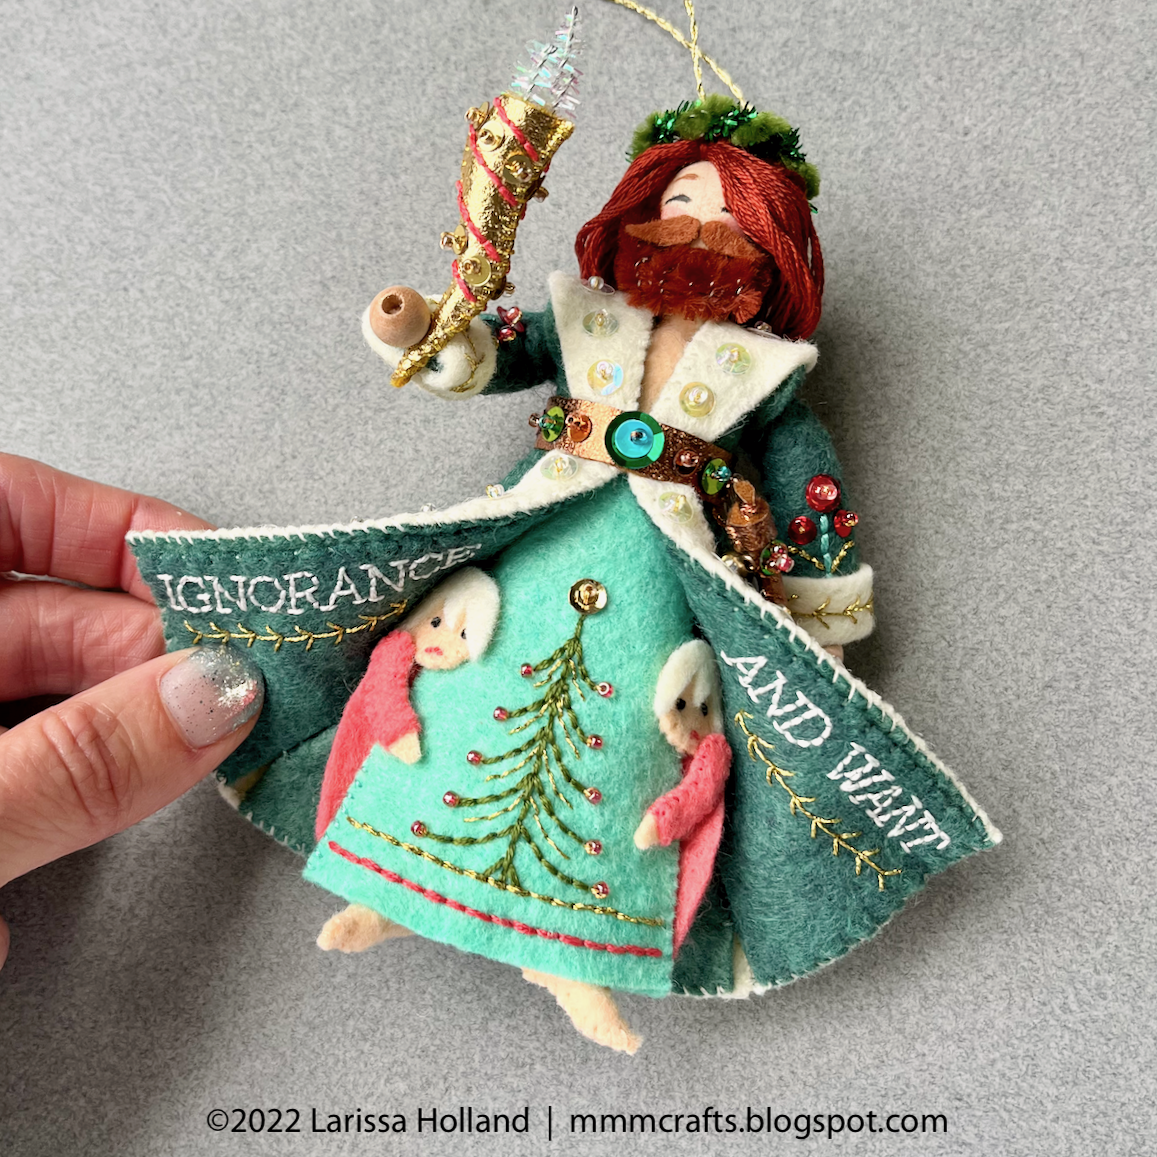 12 Days of Stitchy Ornaments - Confessions of a Homeschooler